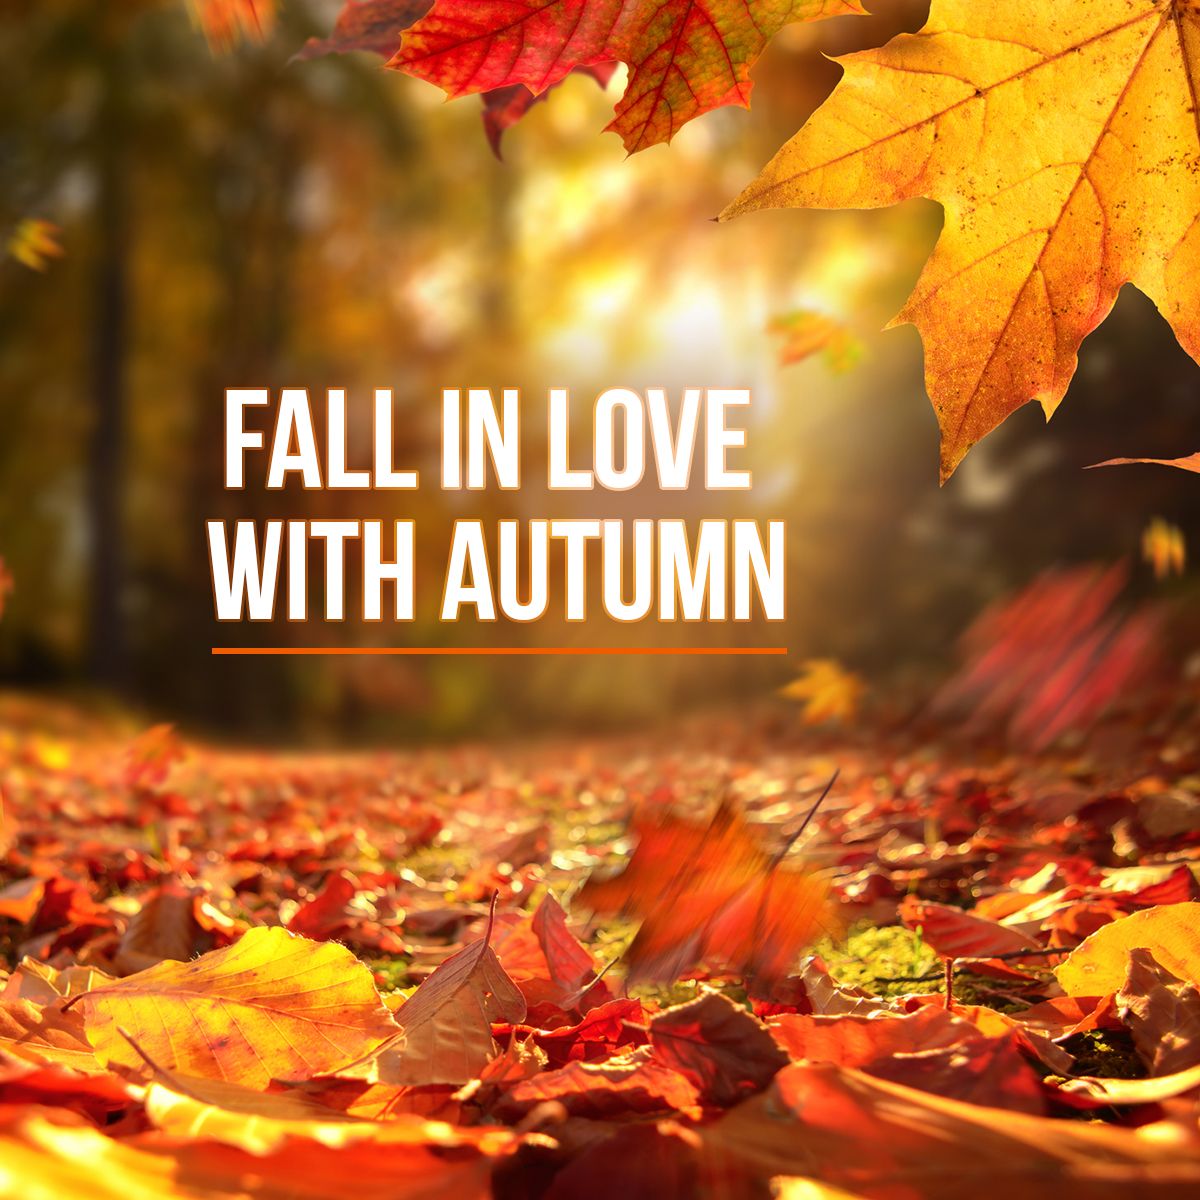 Fall in love with autumn